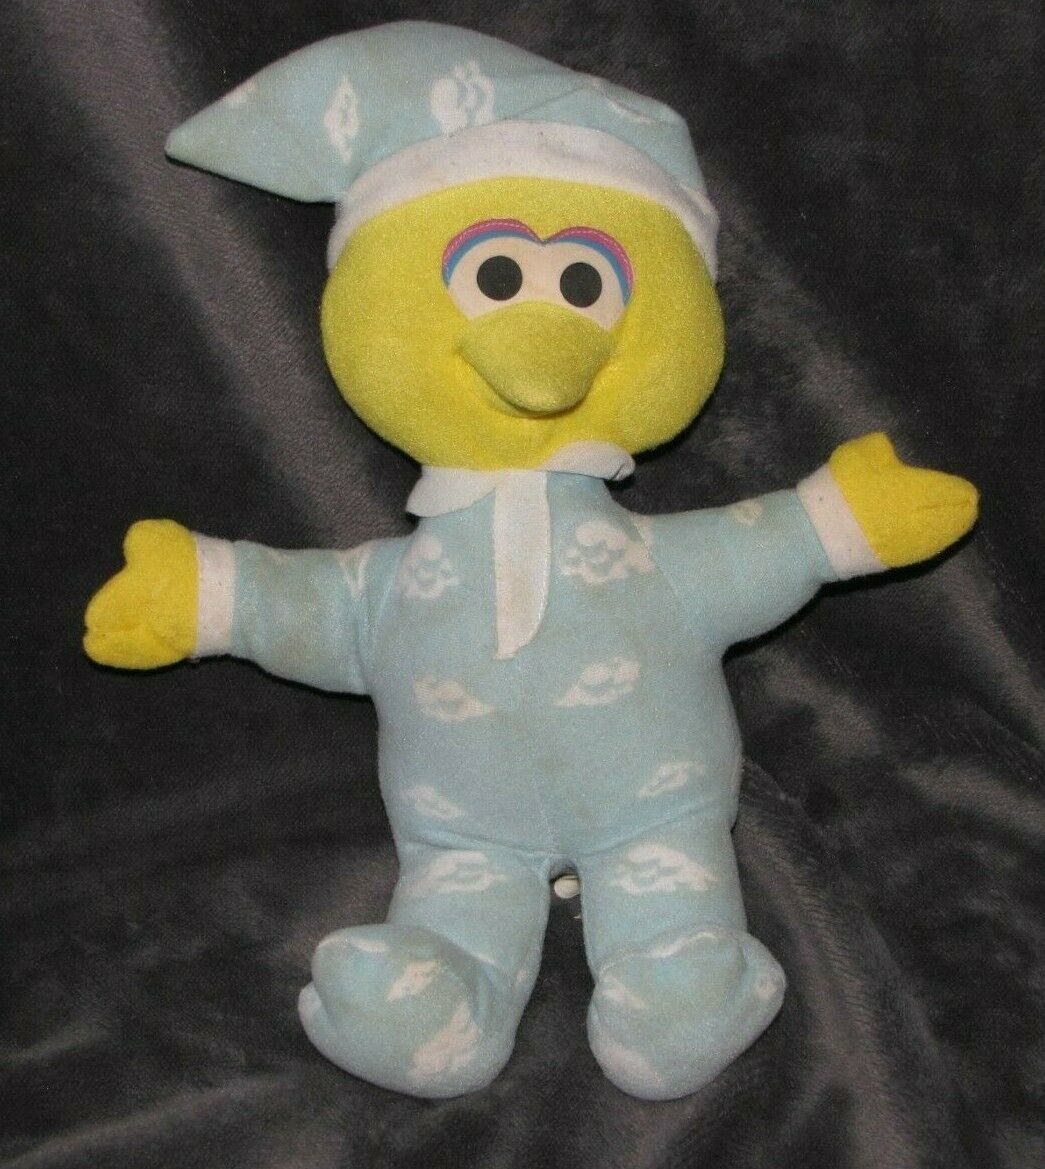 Primary image for FISHER PRICE 2000 MUSICAL LIGHTS BEDTIME BUDDY BIG BIRD SESAME STREET PLUSH TOY